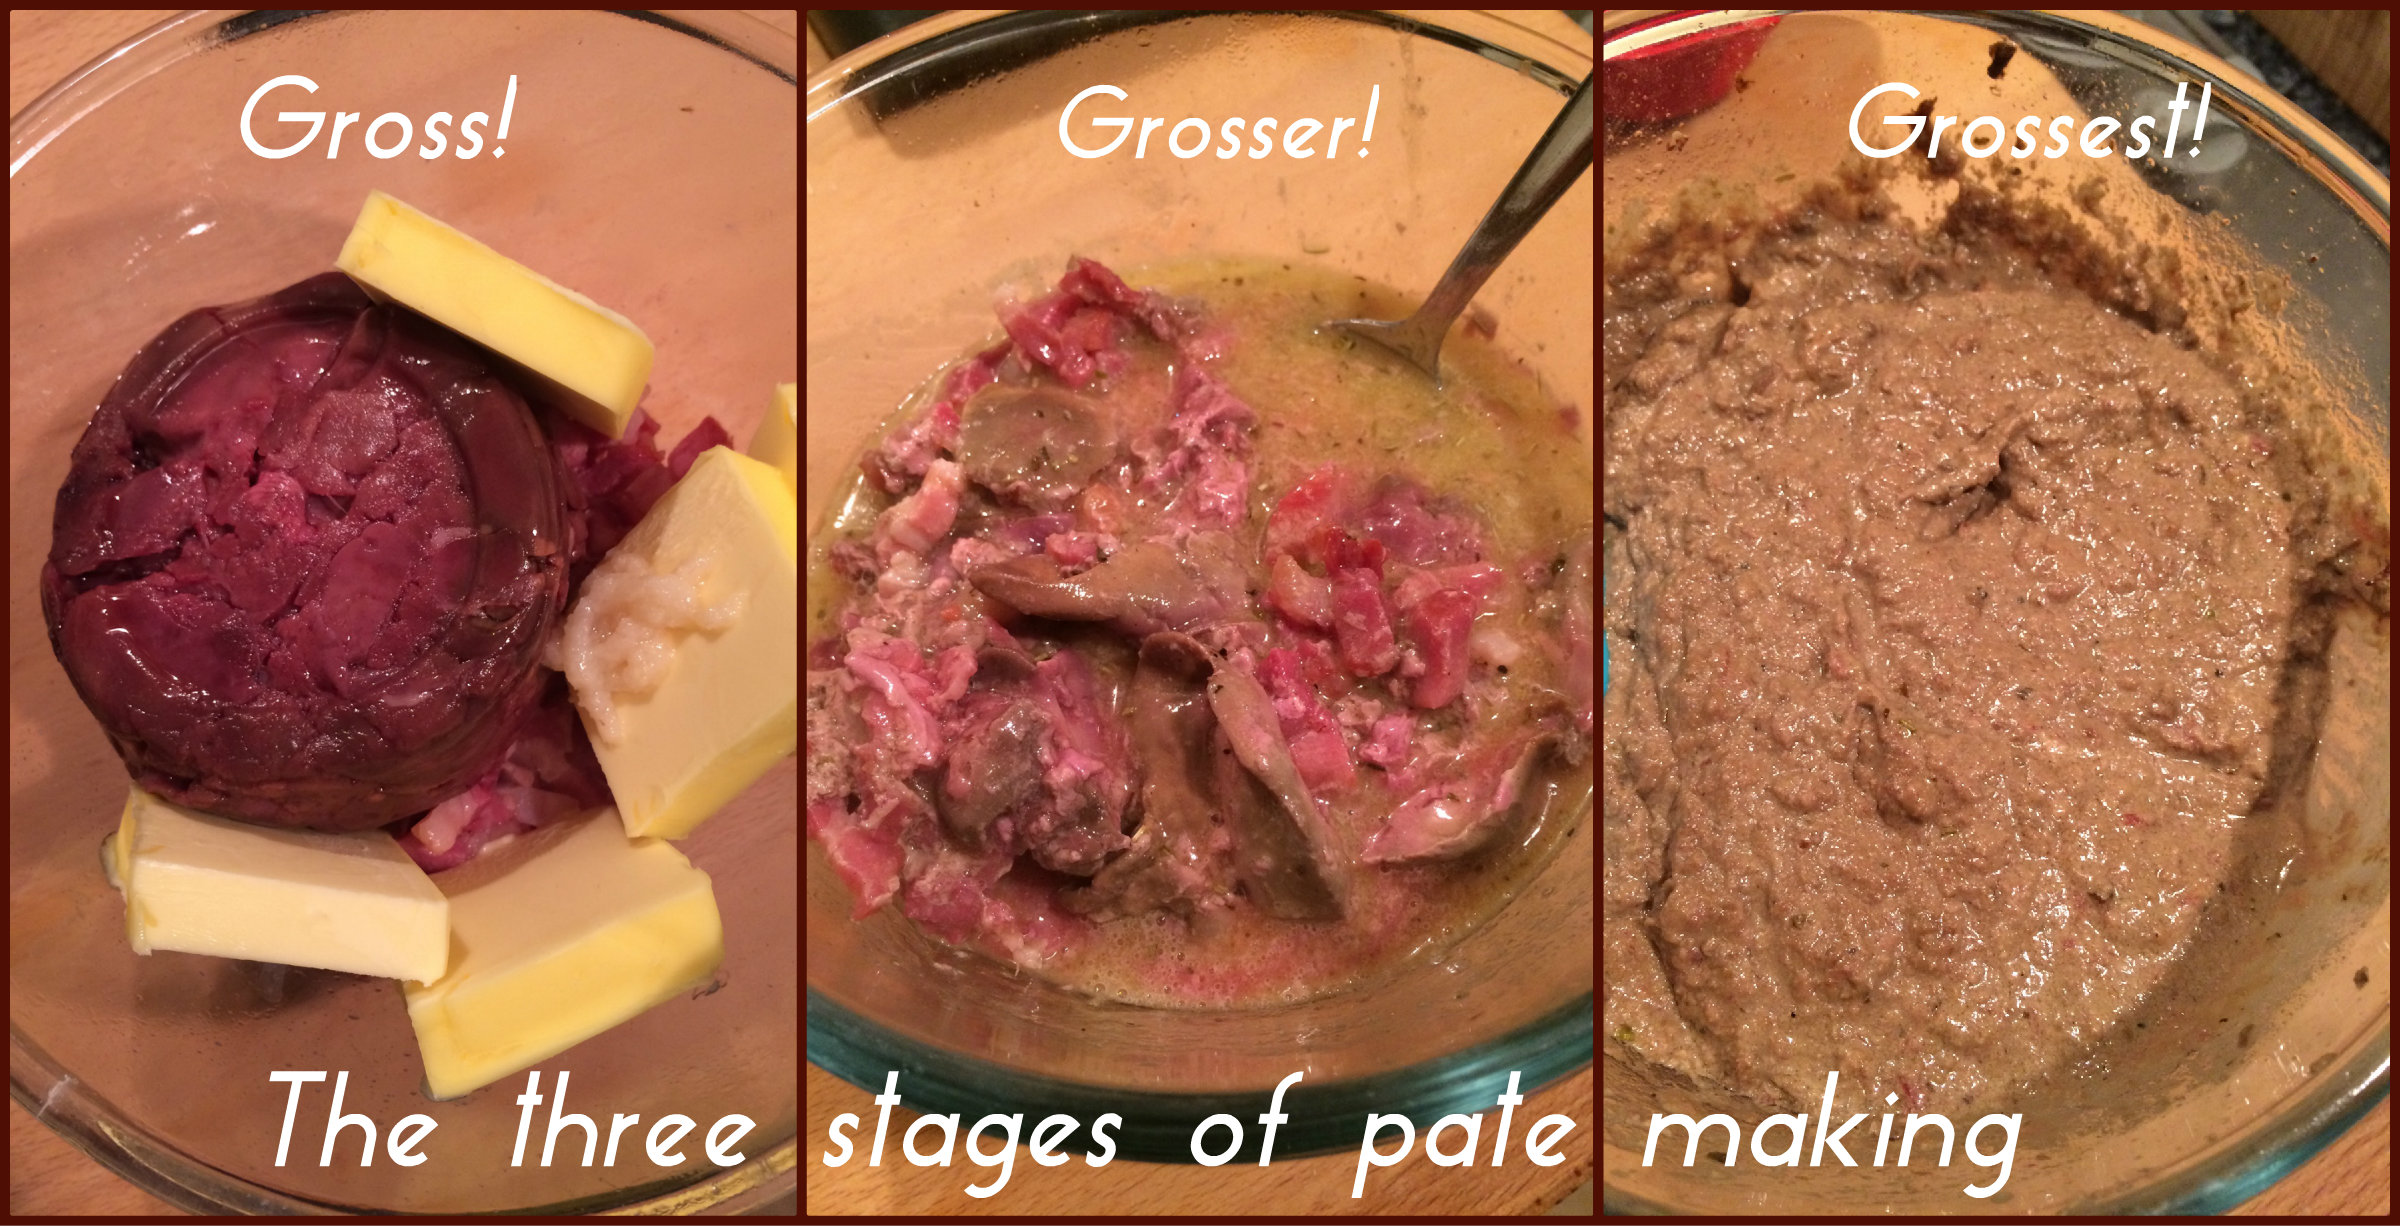 The three stages of pate making